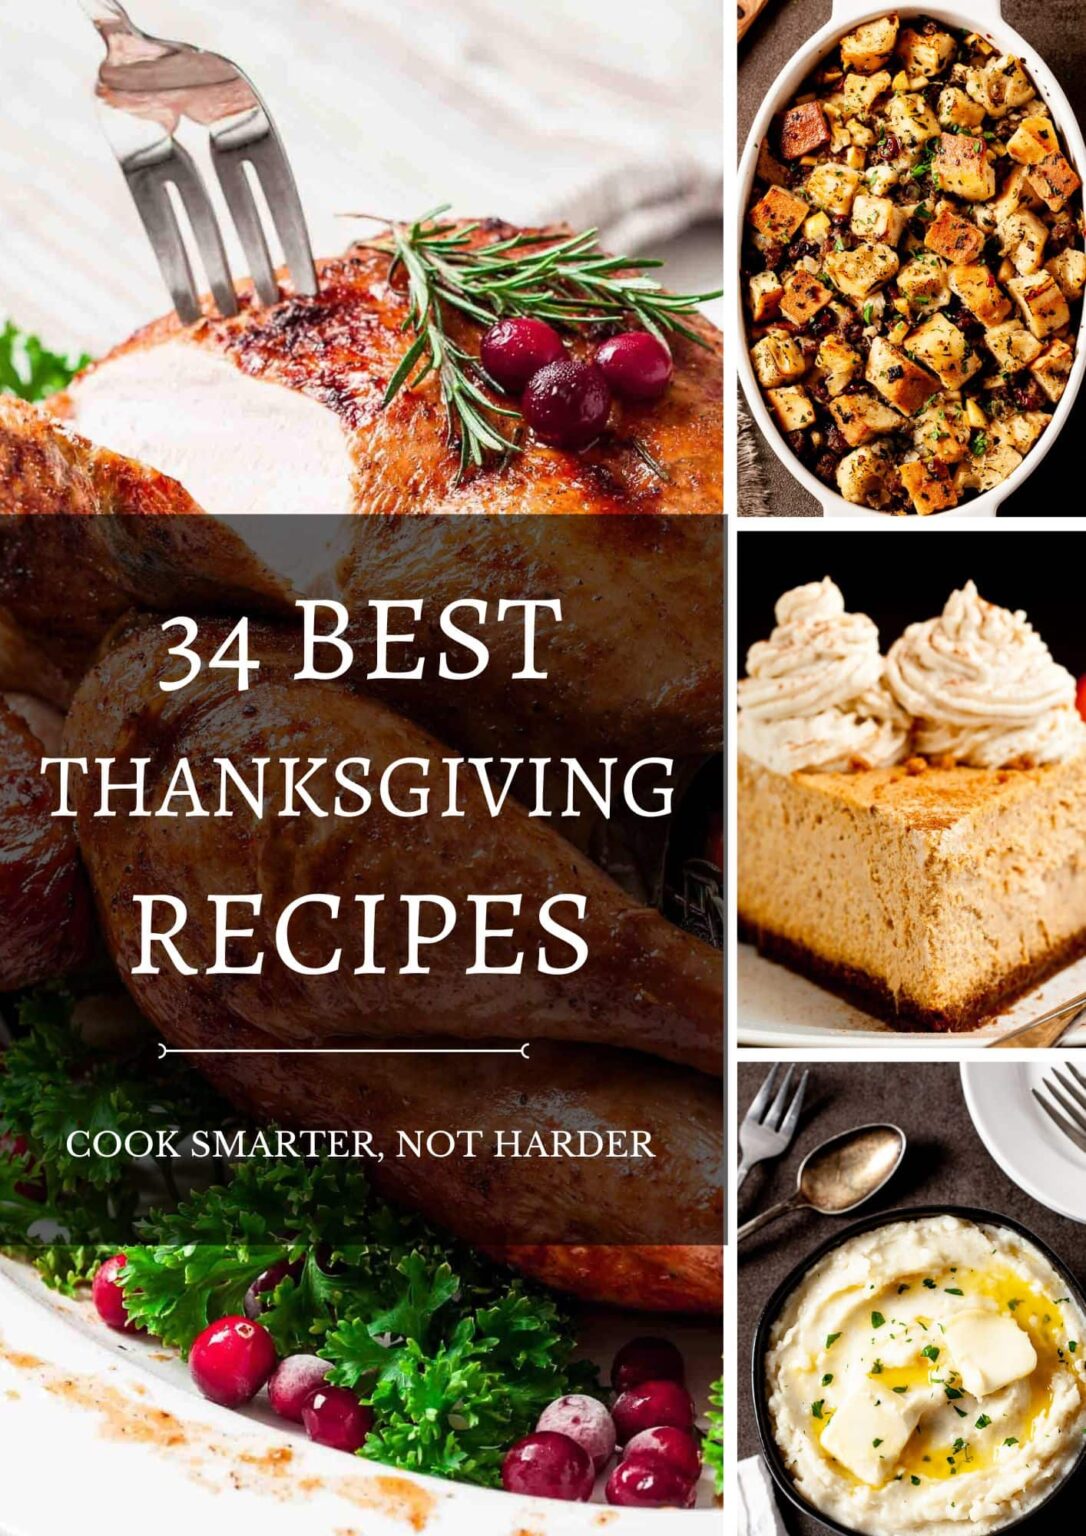 34 Best Thanksgiving Recipes | Chew Out Loud